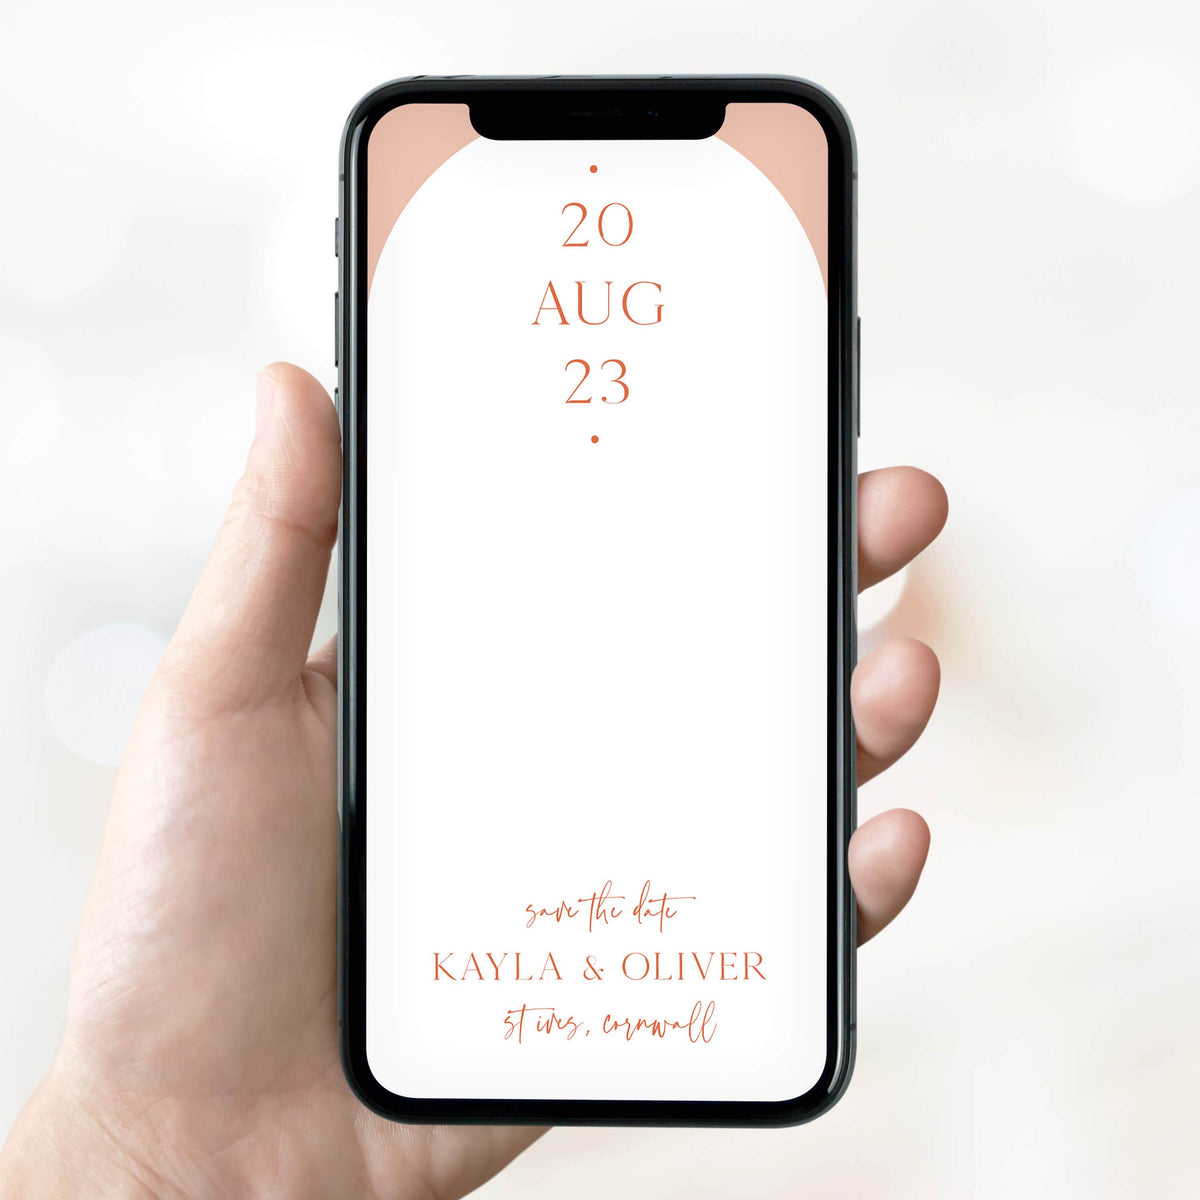 editable save the date, wedding save the date, mobile save the date, save the date, mobile wedding stationery